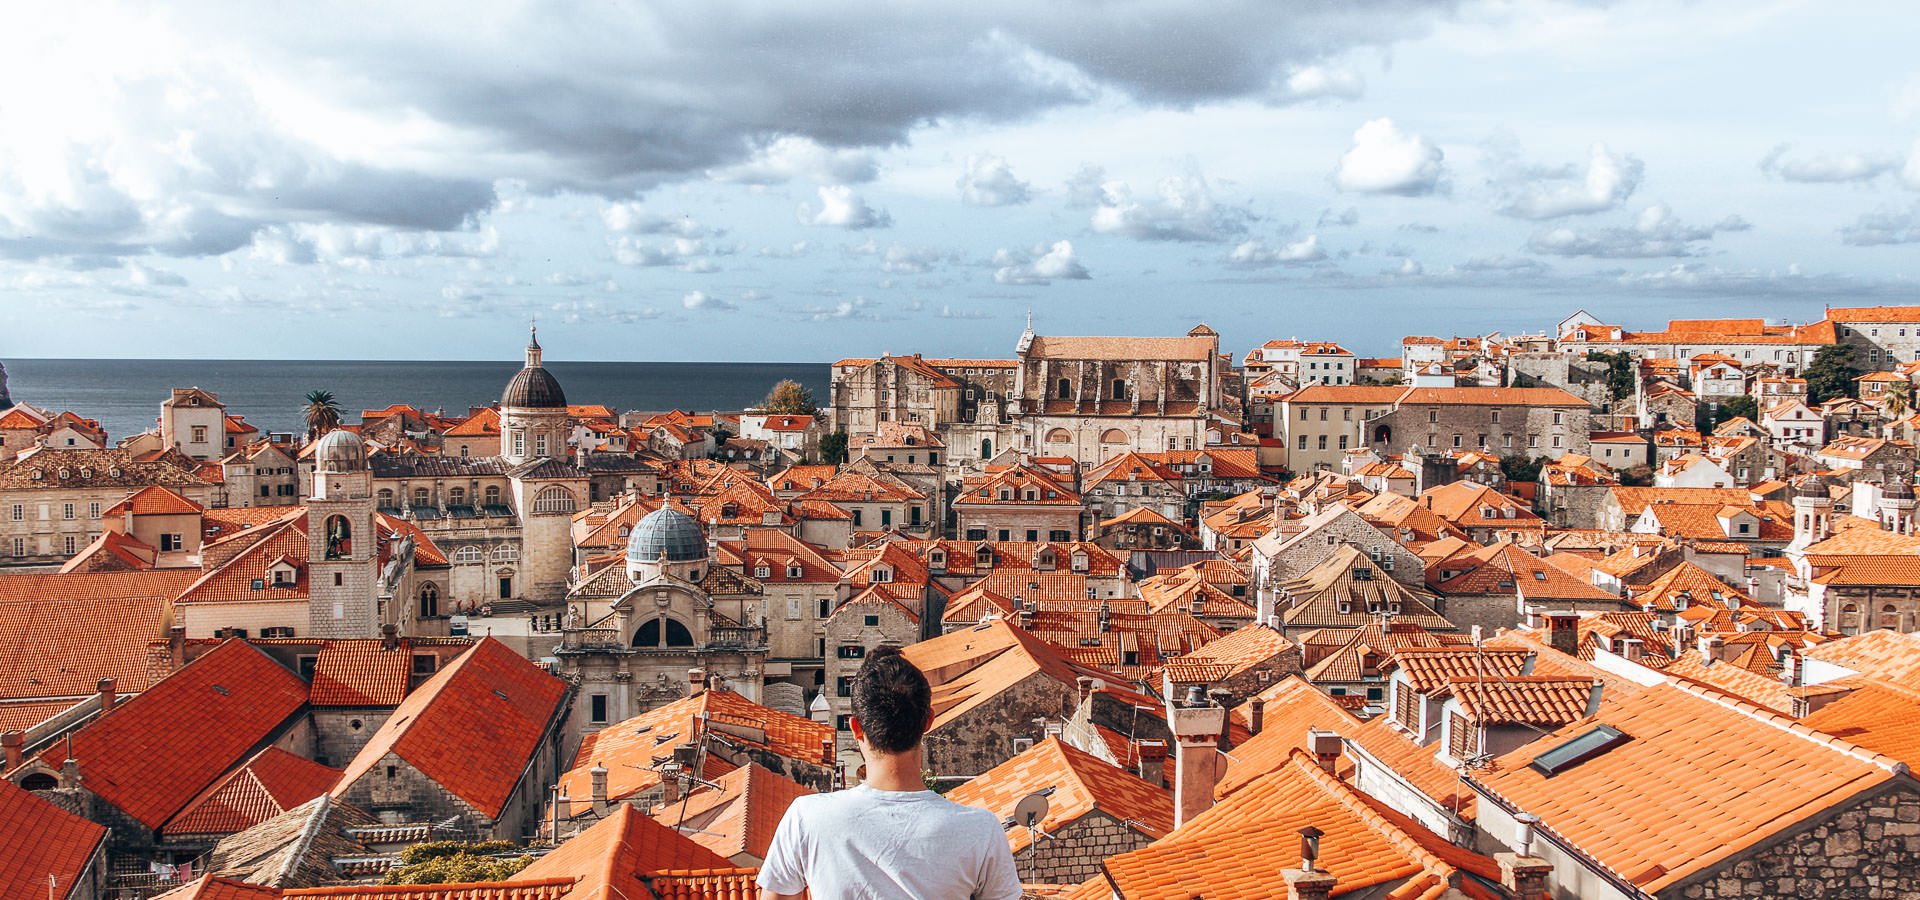 How To Spend 48 Hours In Dubrovnik | 48 hours in dubrovnik 1